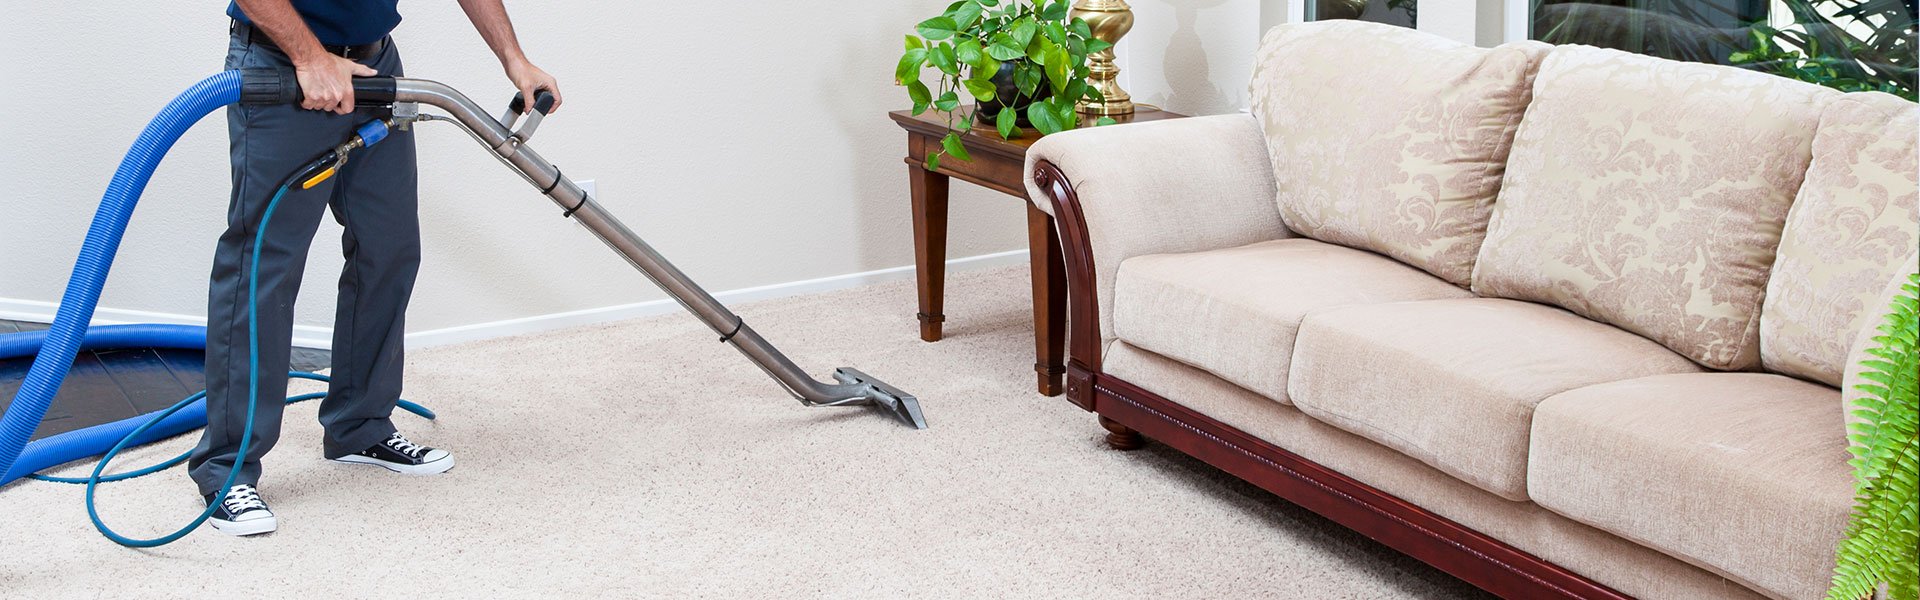 Carpet Cleaning Darwin | Darwin Carpet Cleaners | Dry & Steam Carpet Cleaning